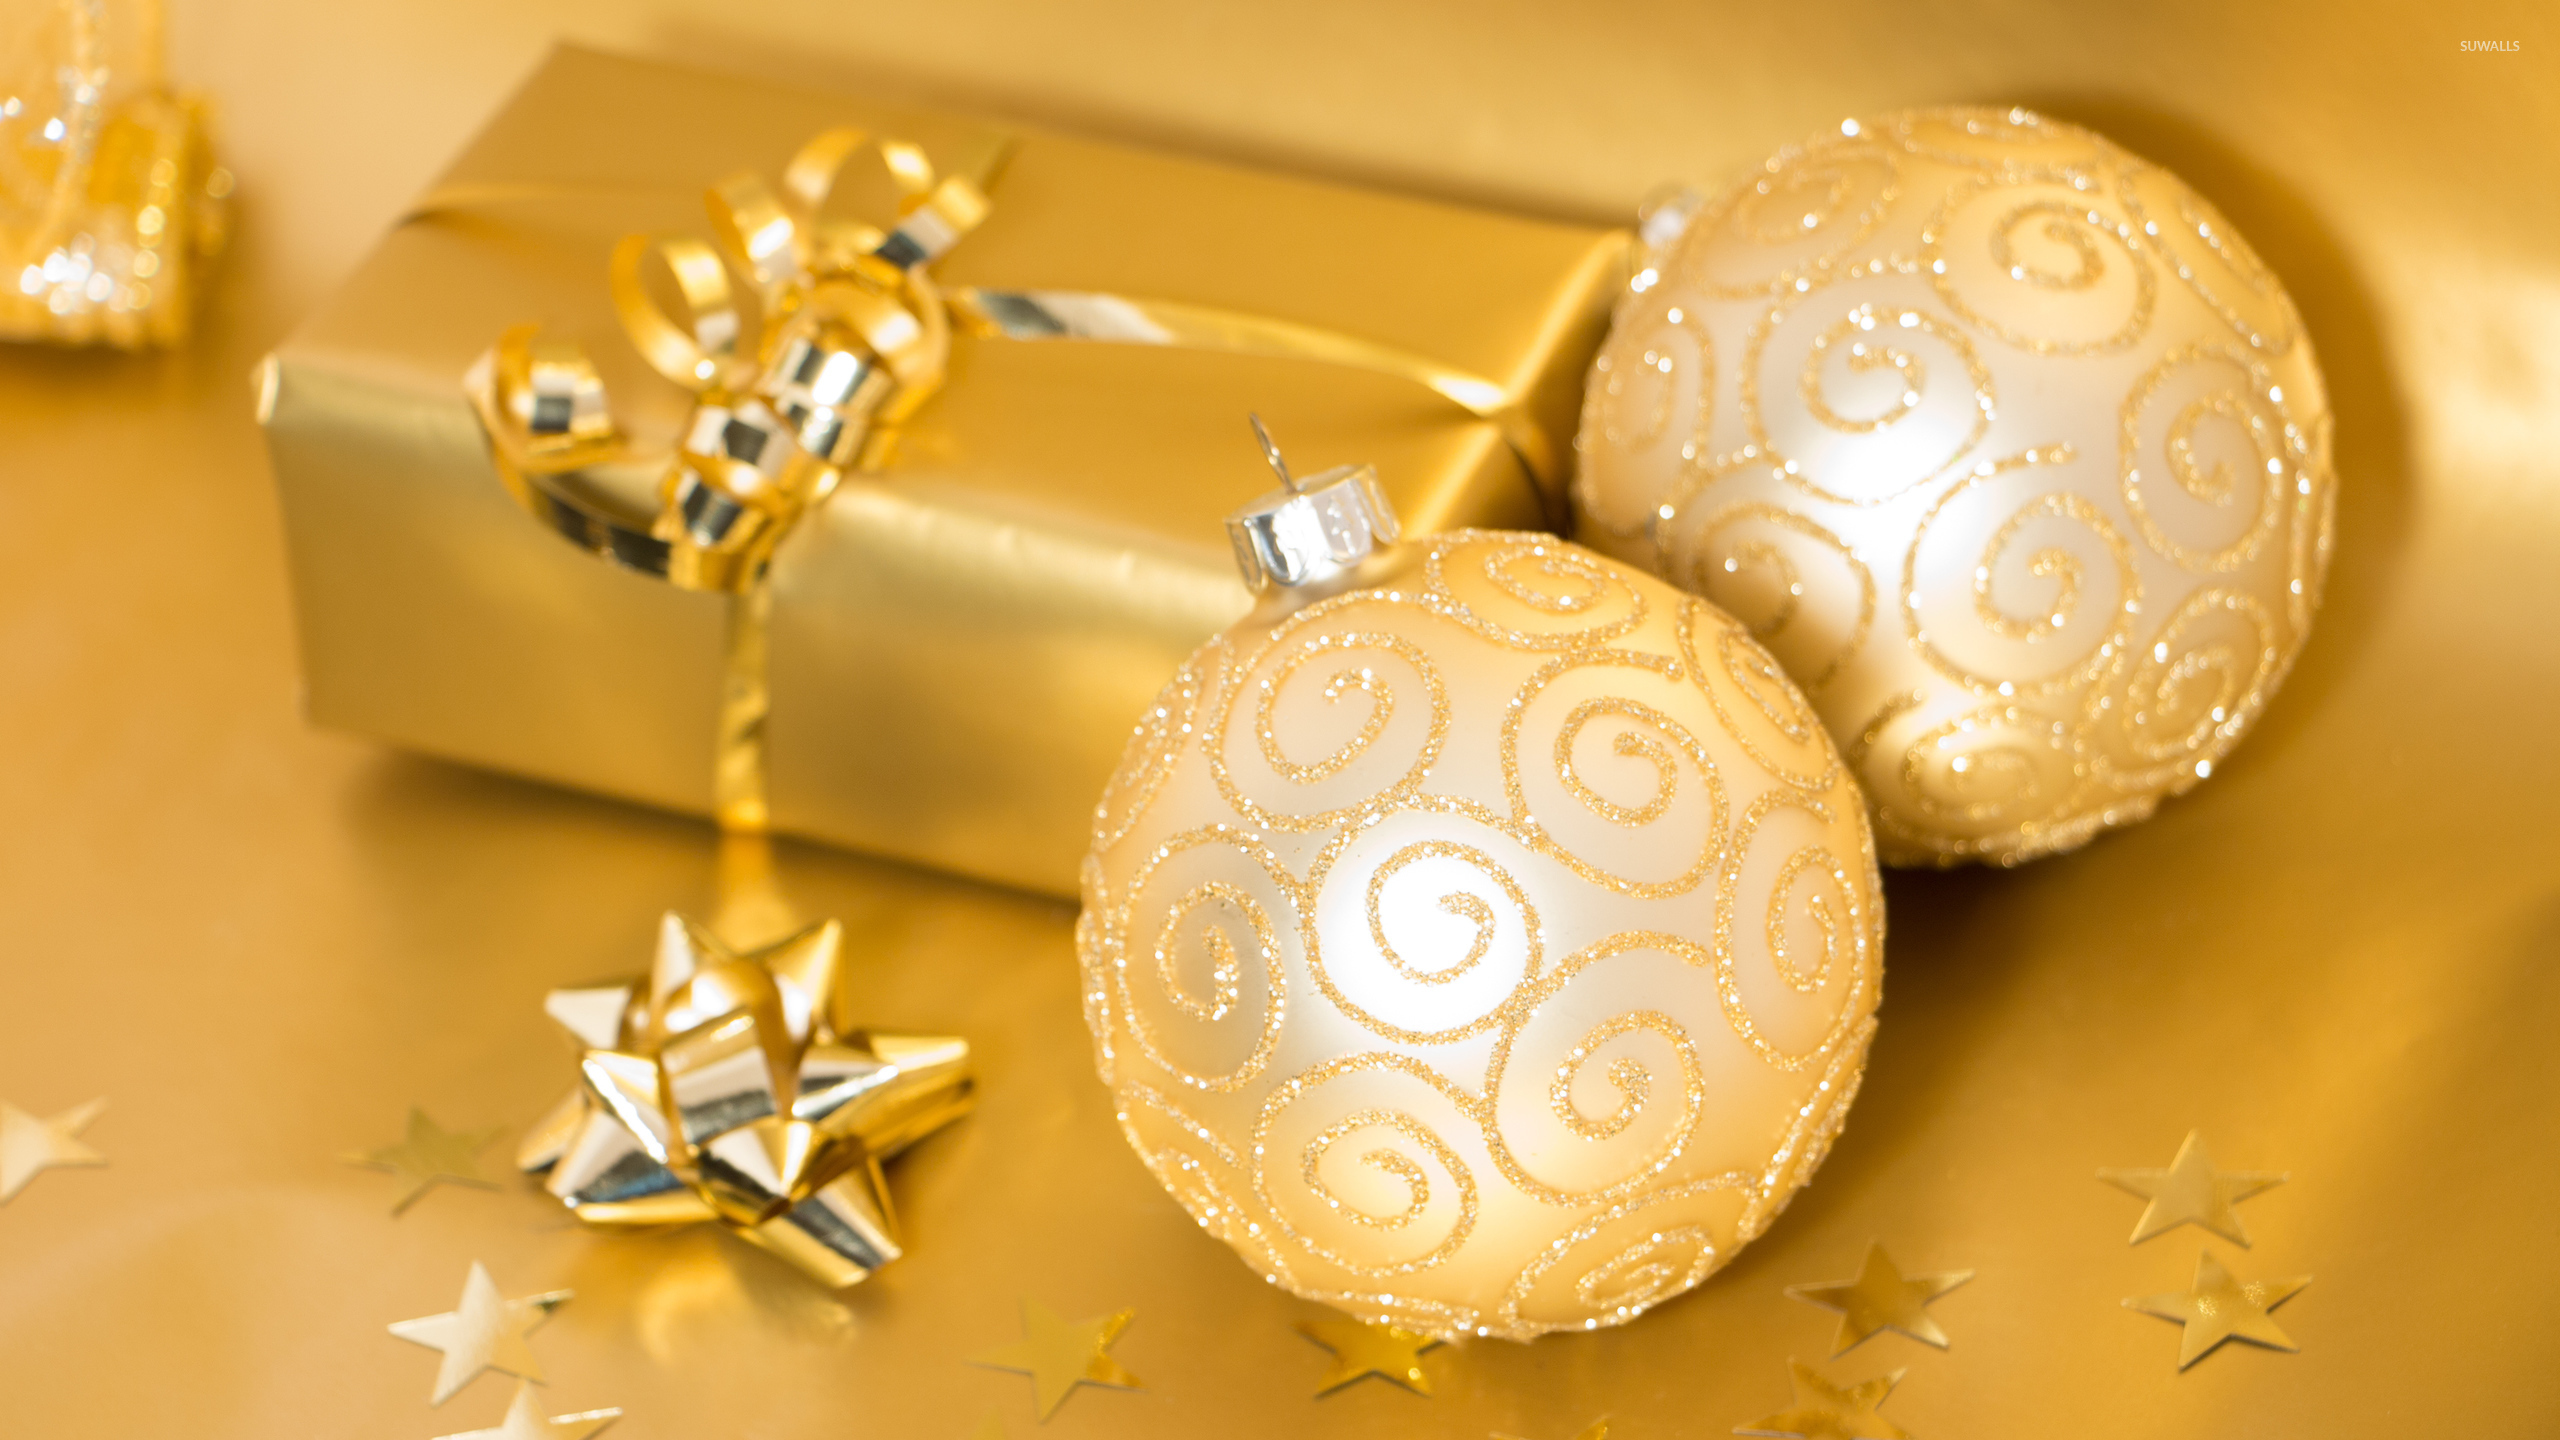 Golden ornaments and present wallpaper - Holiday wallpapers - #51440